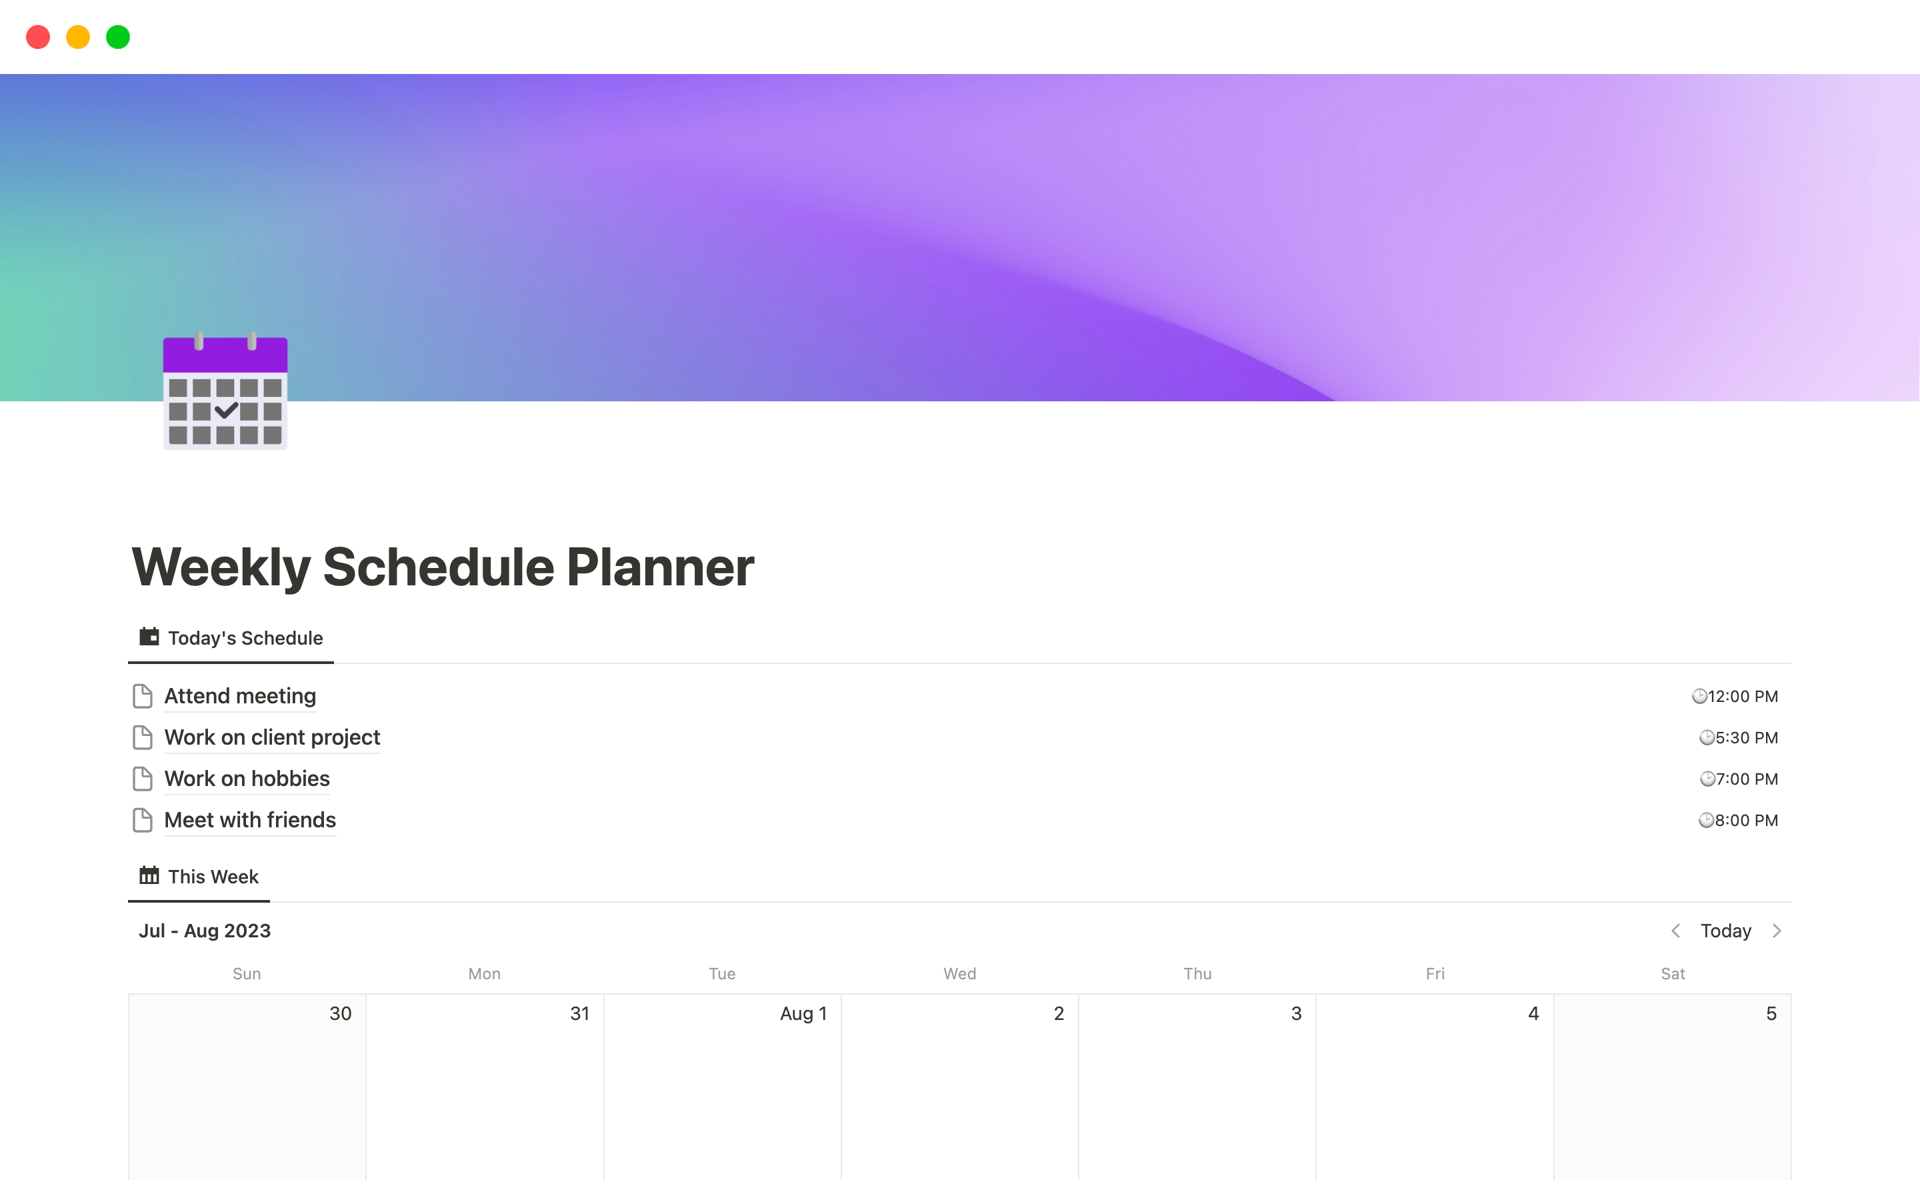 This template helps you efficiently plan your weekly schedule.